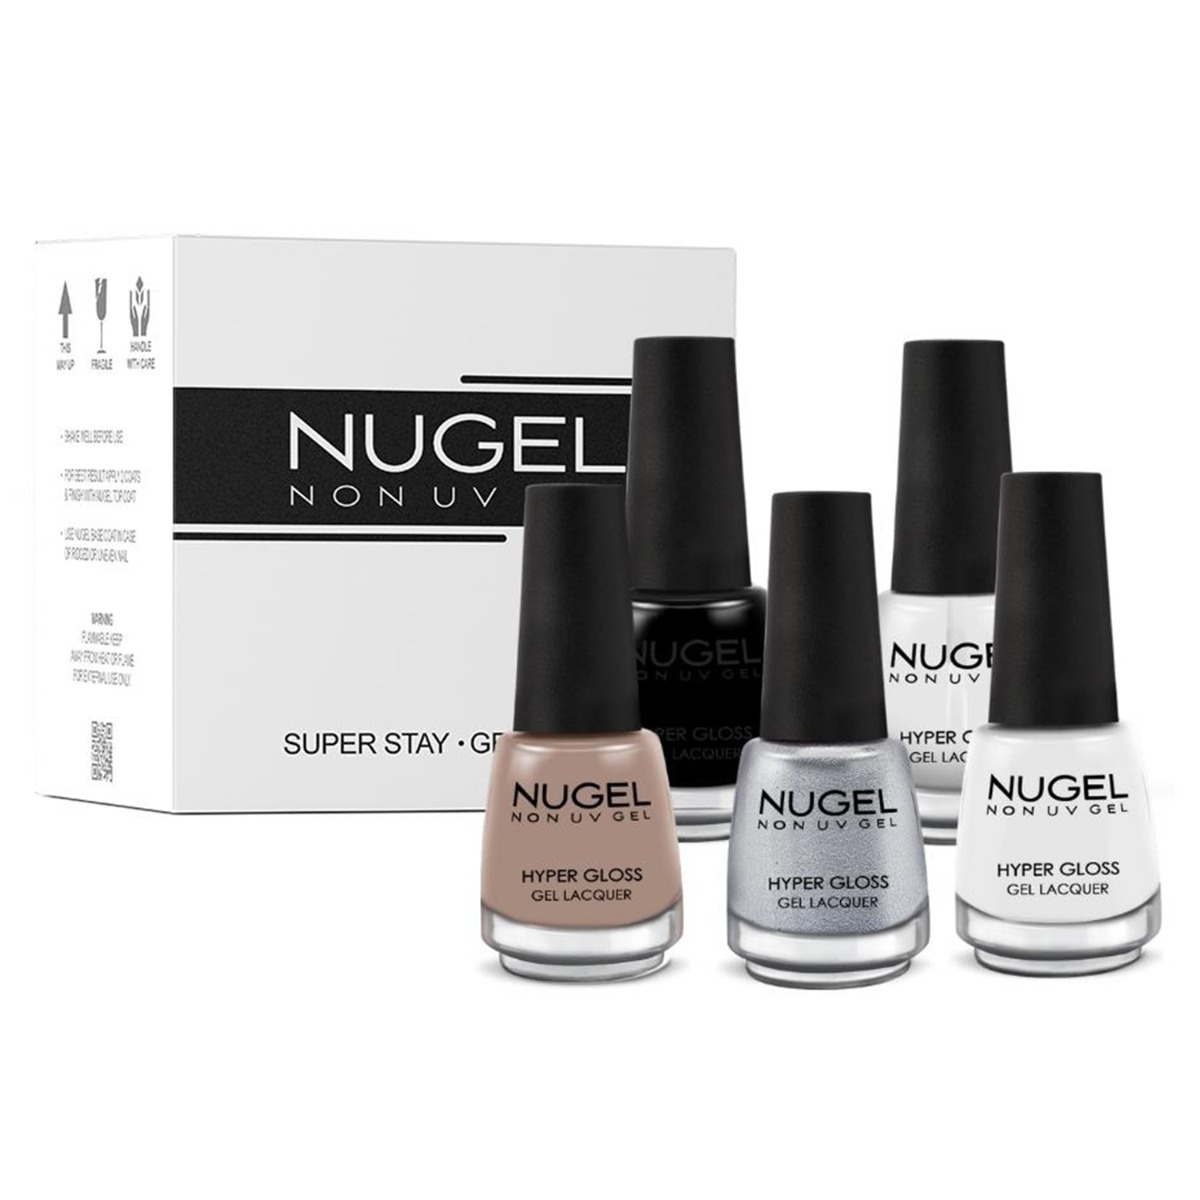 NUGEL 5 In 1 Combo 24 Quick Dry  Gel Finish Nail Paint - Classic Manicure, Nail Kit, 65ml